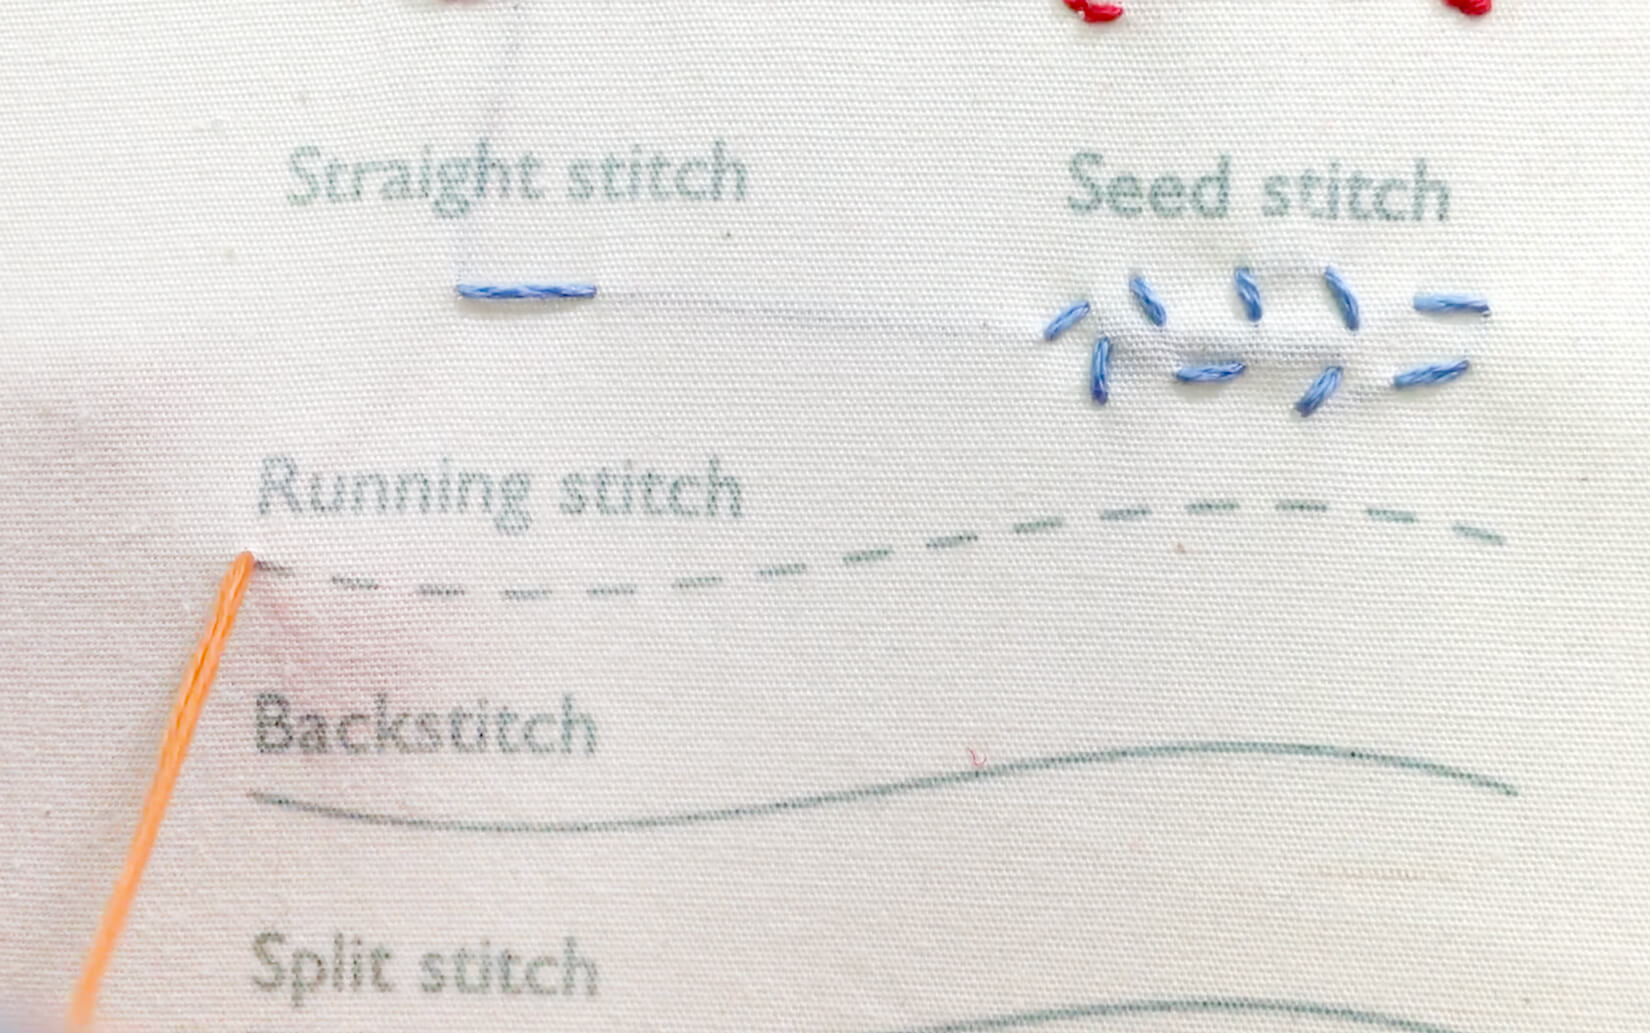 Running stitch - embroidery how-to, quick video, and step by step guid